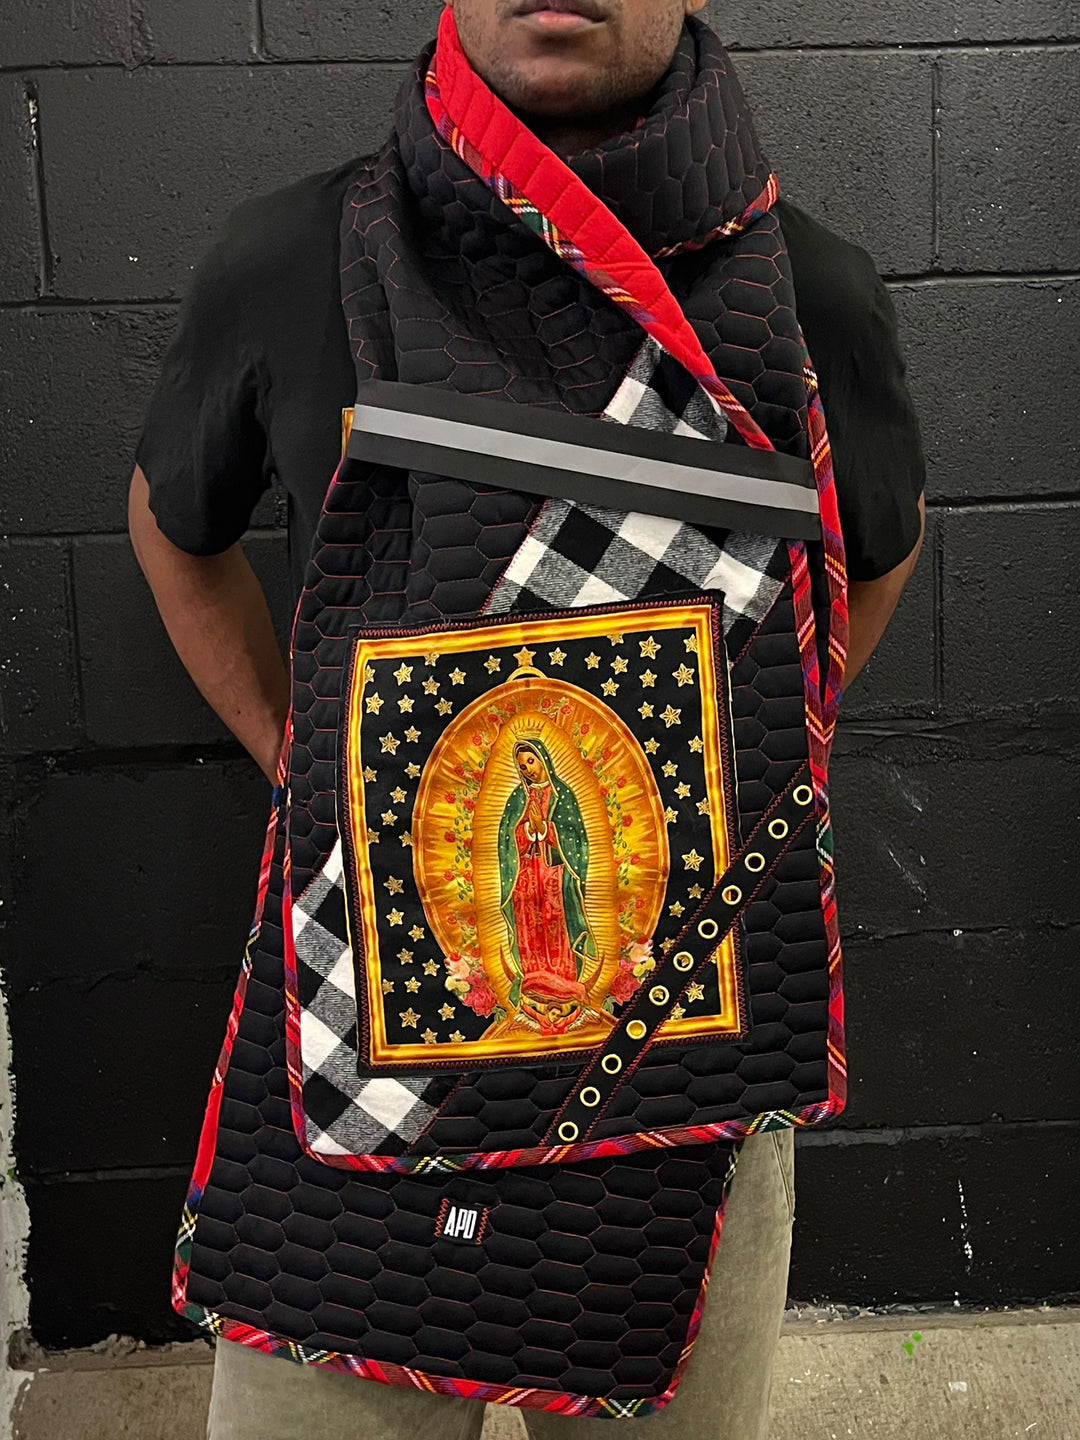 Our Lady of Guadalupe Quilted Patchwork Scarf (25% OFF)